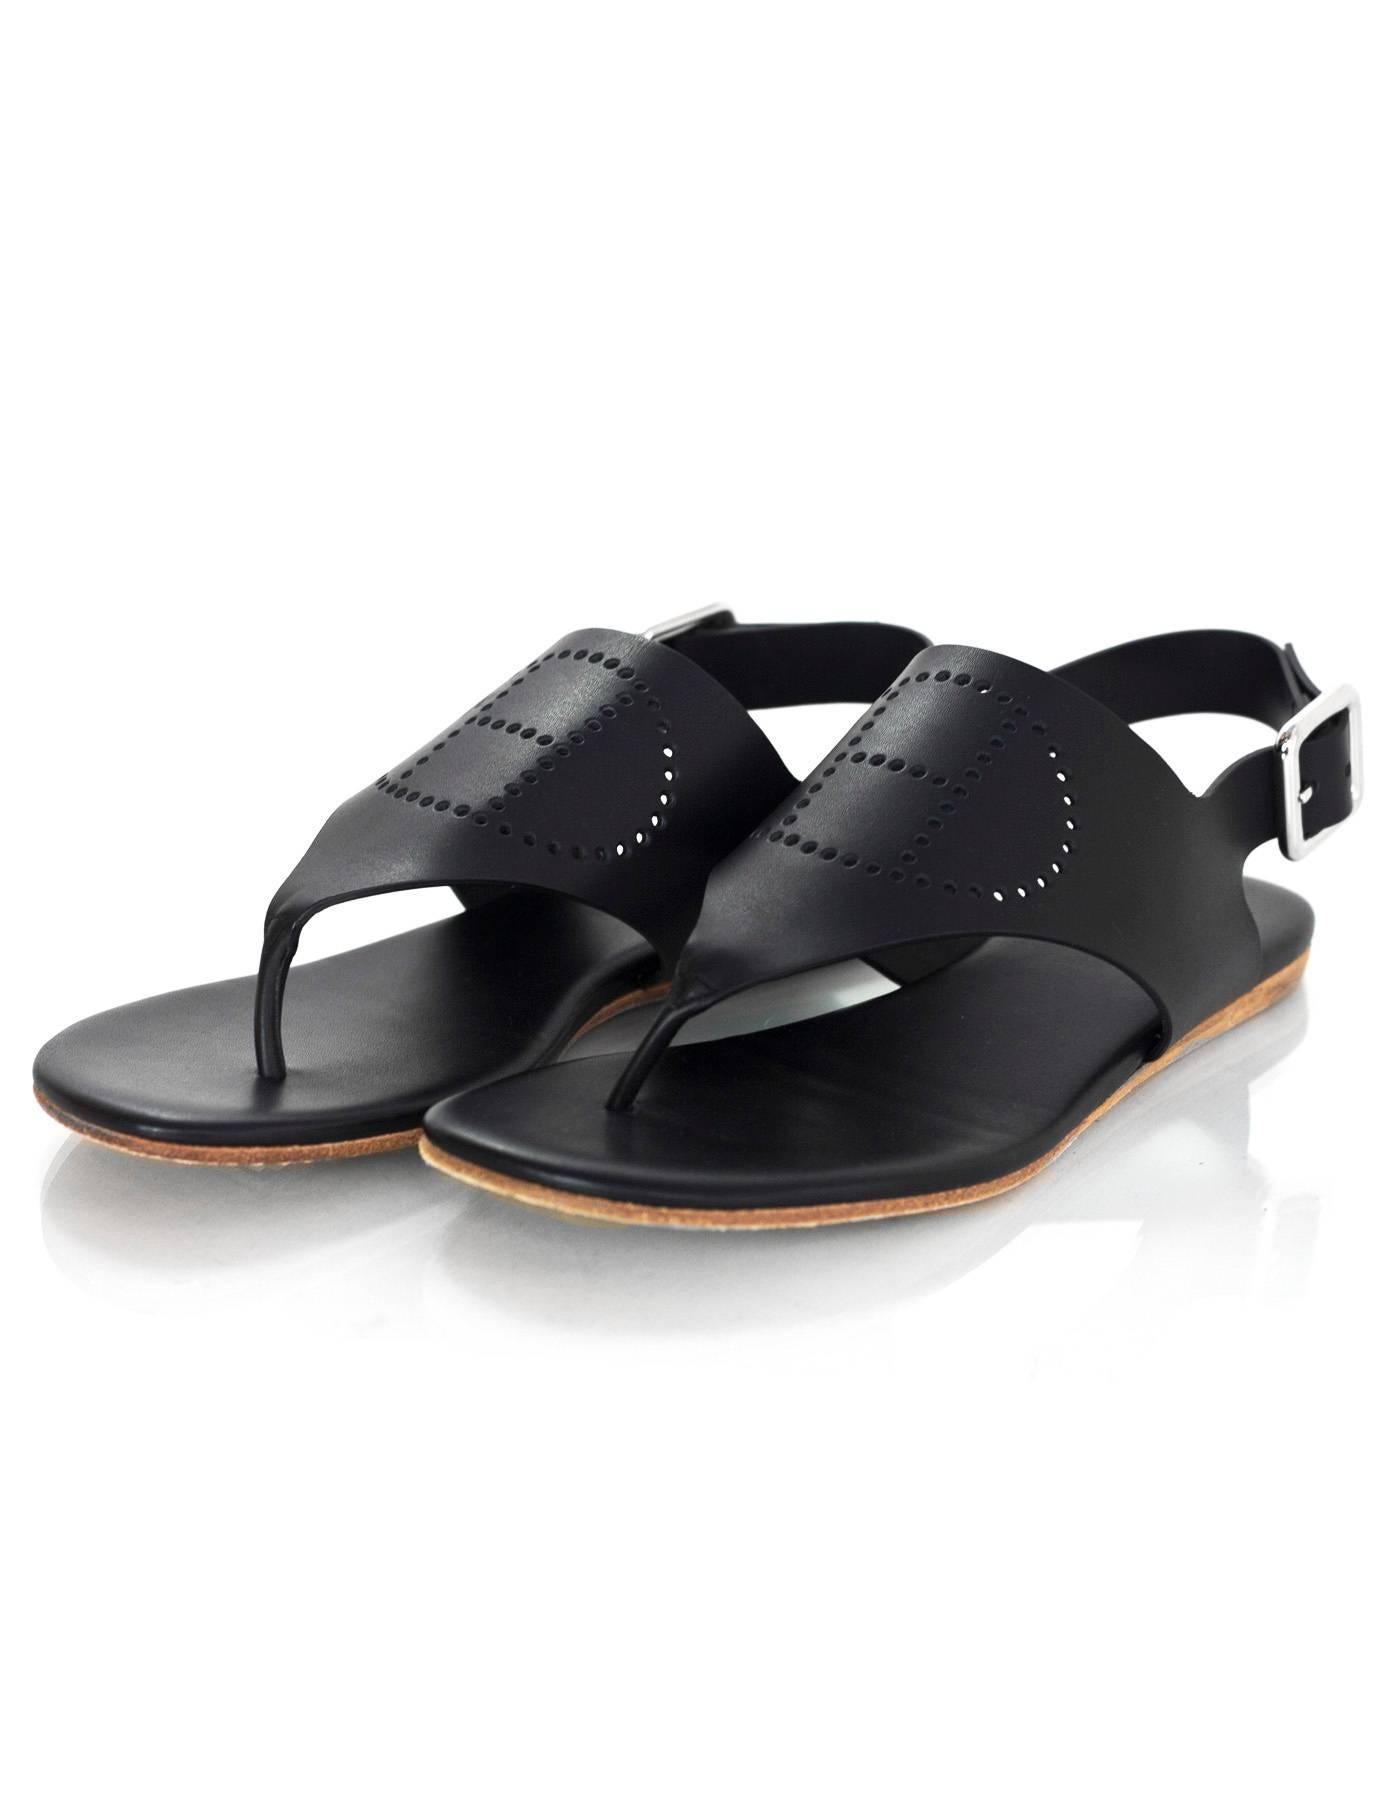 Hermes Black Leather H Sandals Sz 36

Features perforated H

Made In: Spain
Color: Black
Materials: Leather
Closure/Opening: Buckle closure at ankle
Sole Stamp: Hermes 36 Semelle Cuir Made in Spain
Overall Condition: Excellent pre-owned condition,